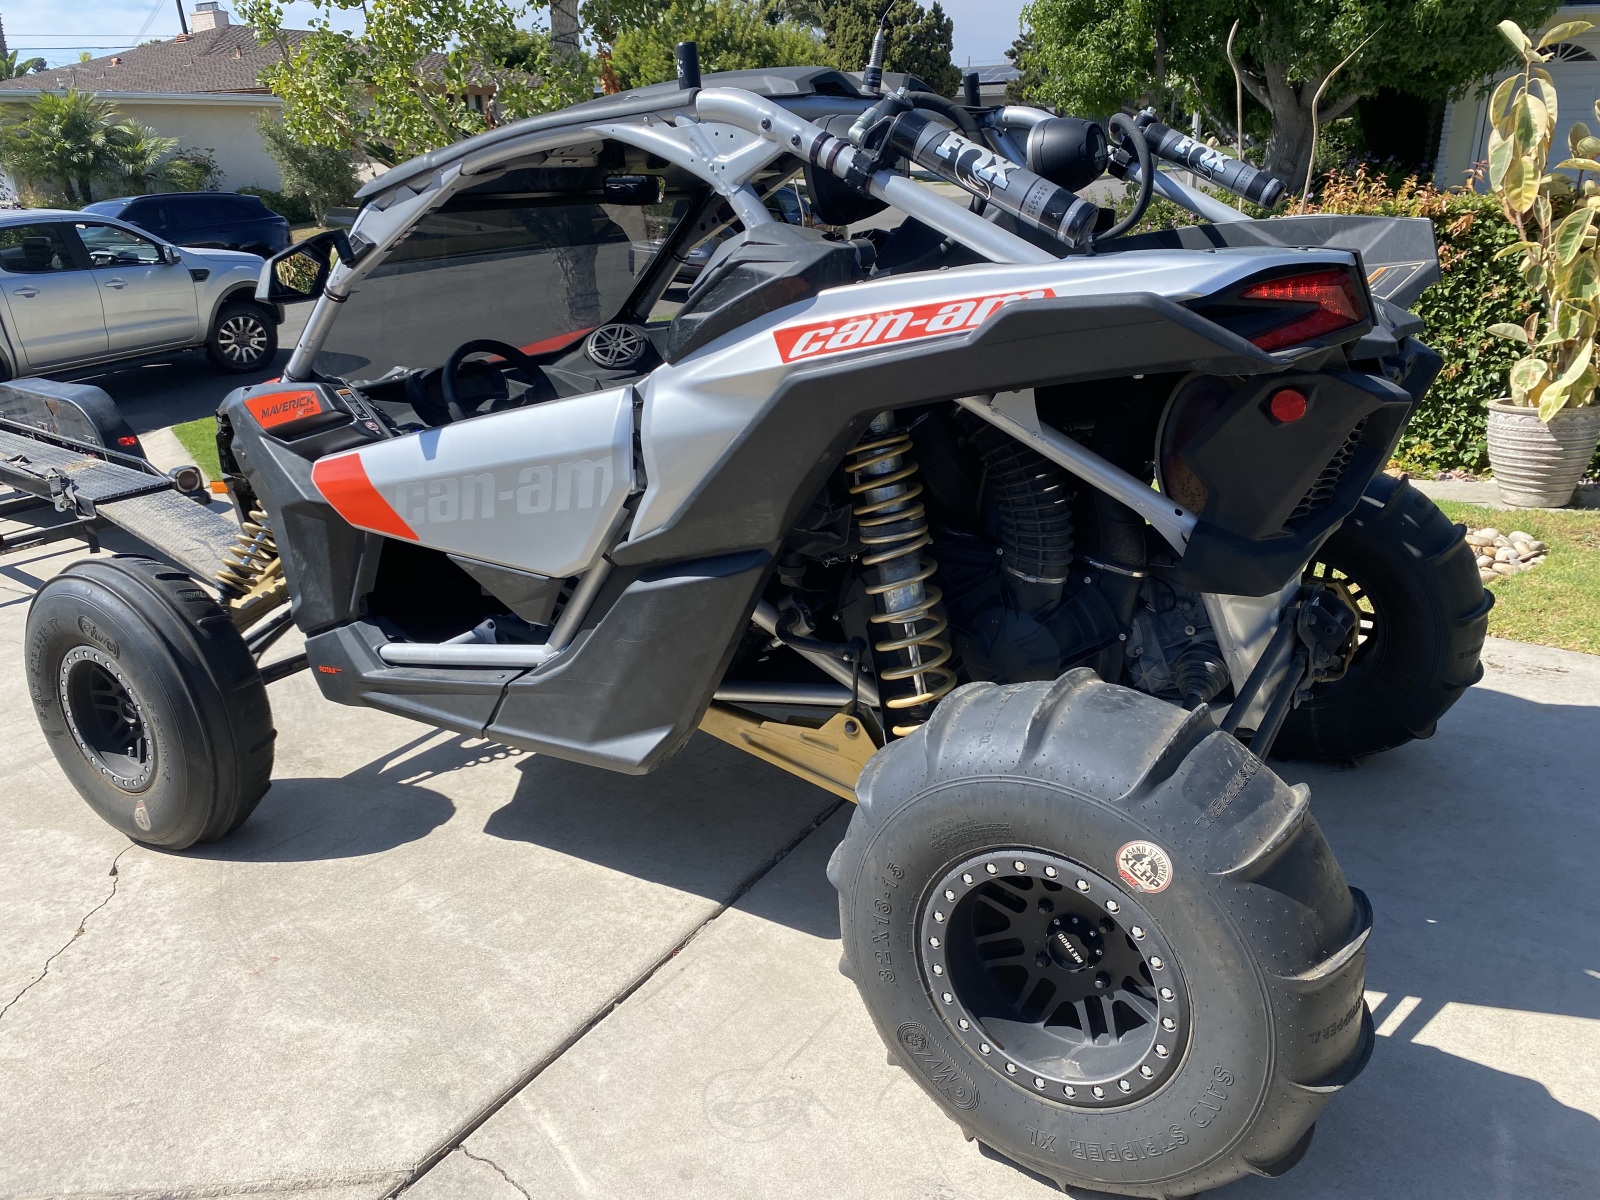 For Sale: 2020 Can am xrs rr  - photo1